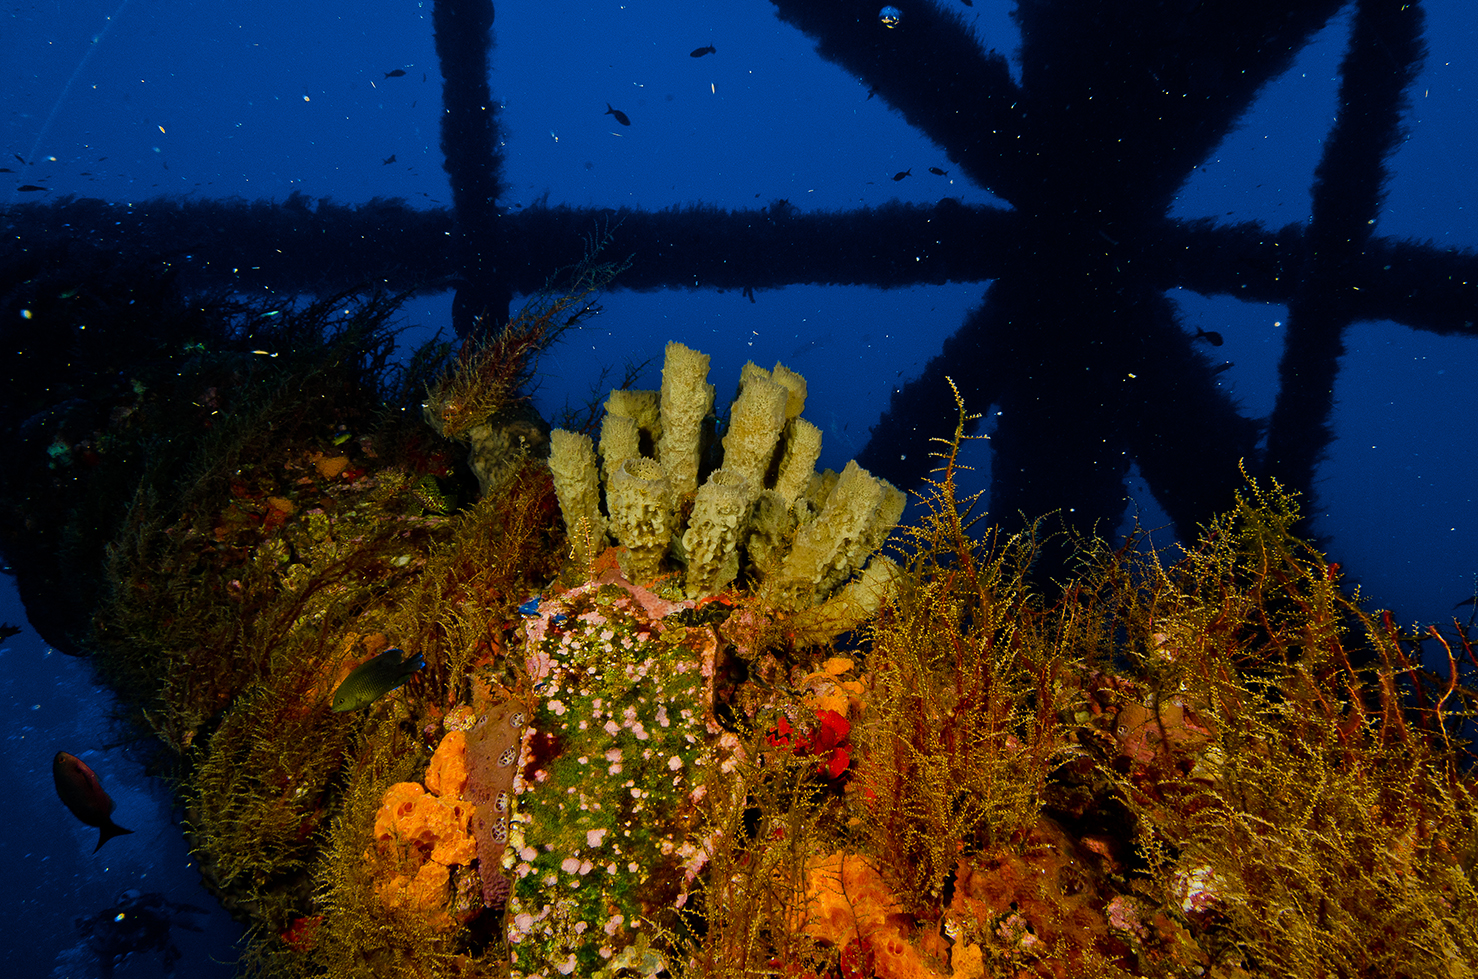 Sponges, hydroids, and more on an oil and gas platform.